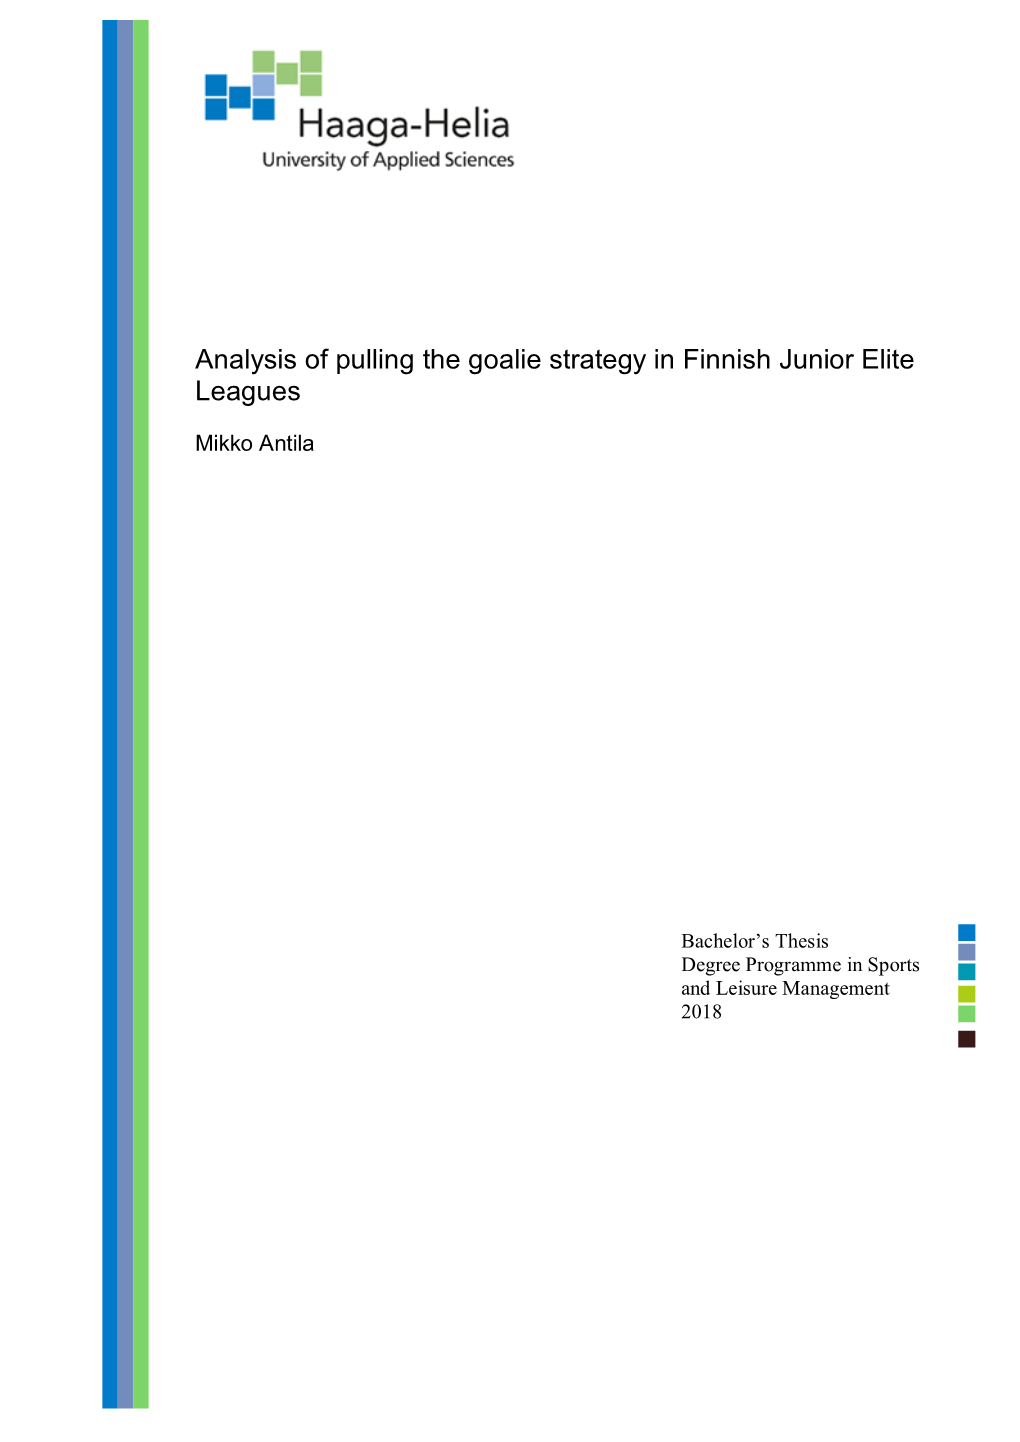 Analysis of Pulling the Goalie Strategy in Finnish Junior Elite Leagues